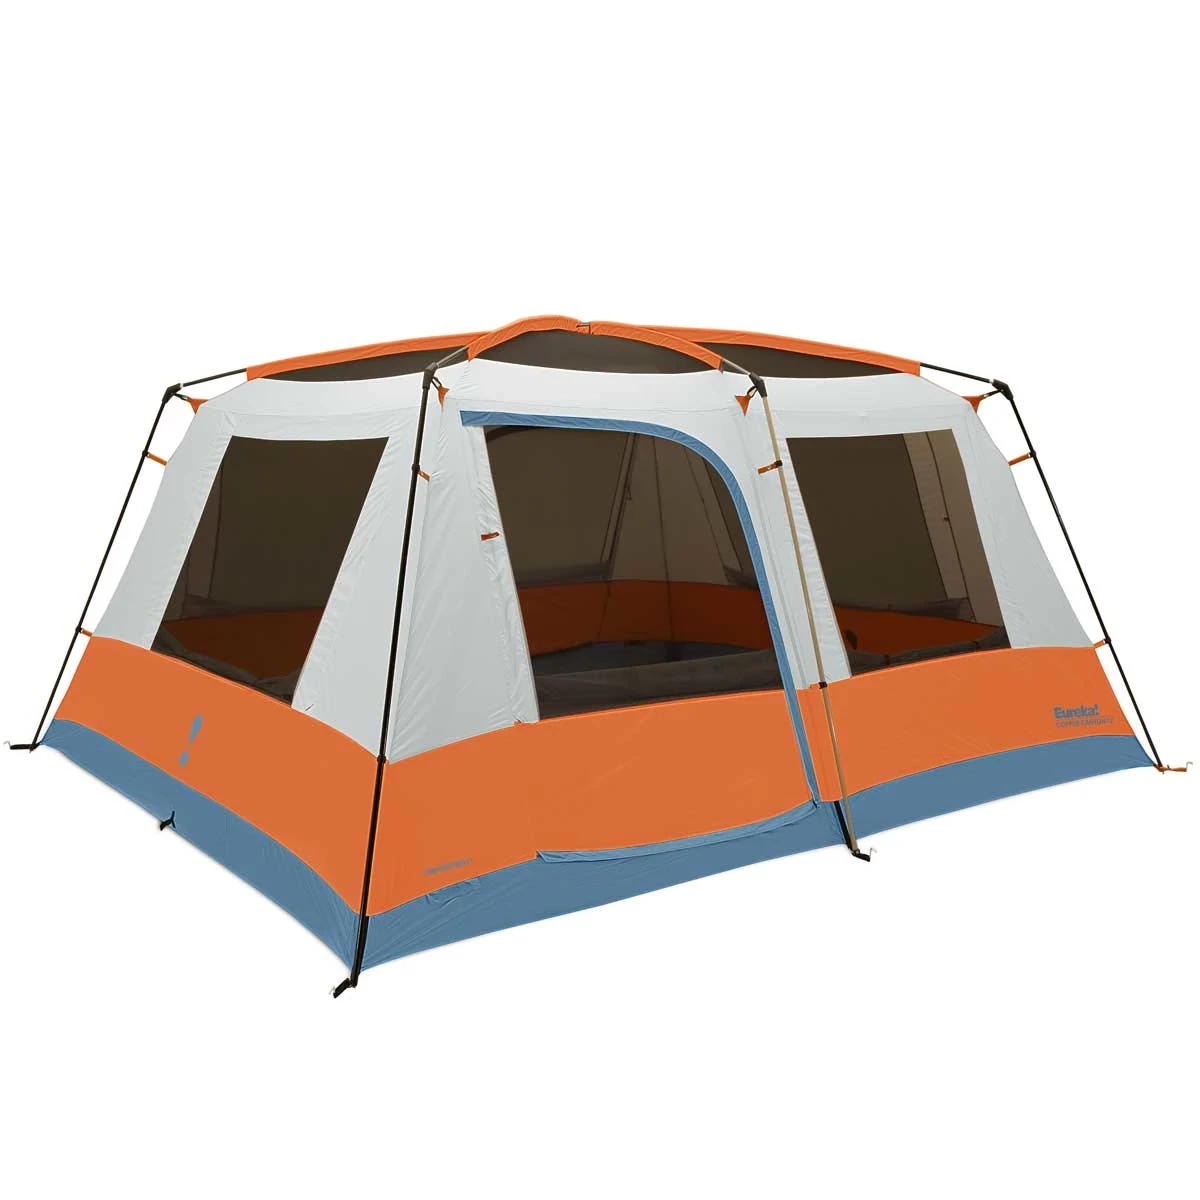 Copper Canyon LX 12 tent without rainfly windows open